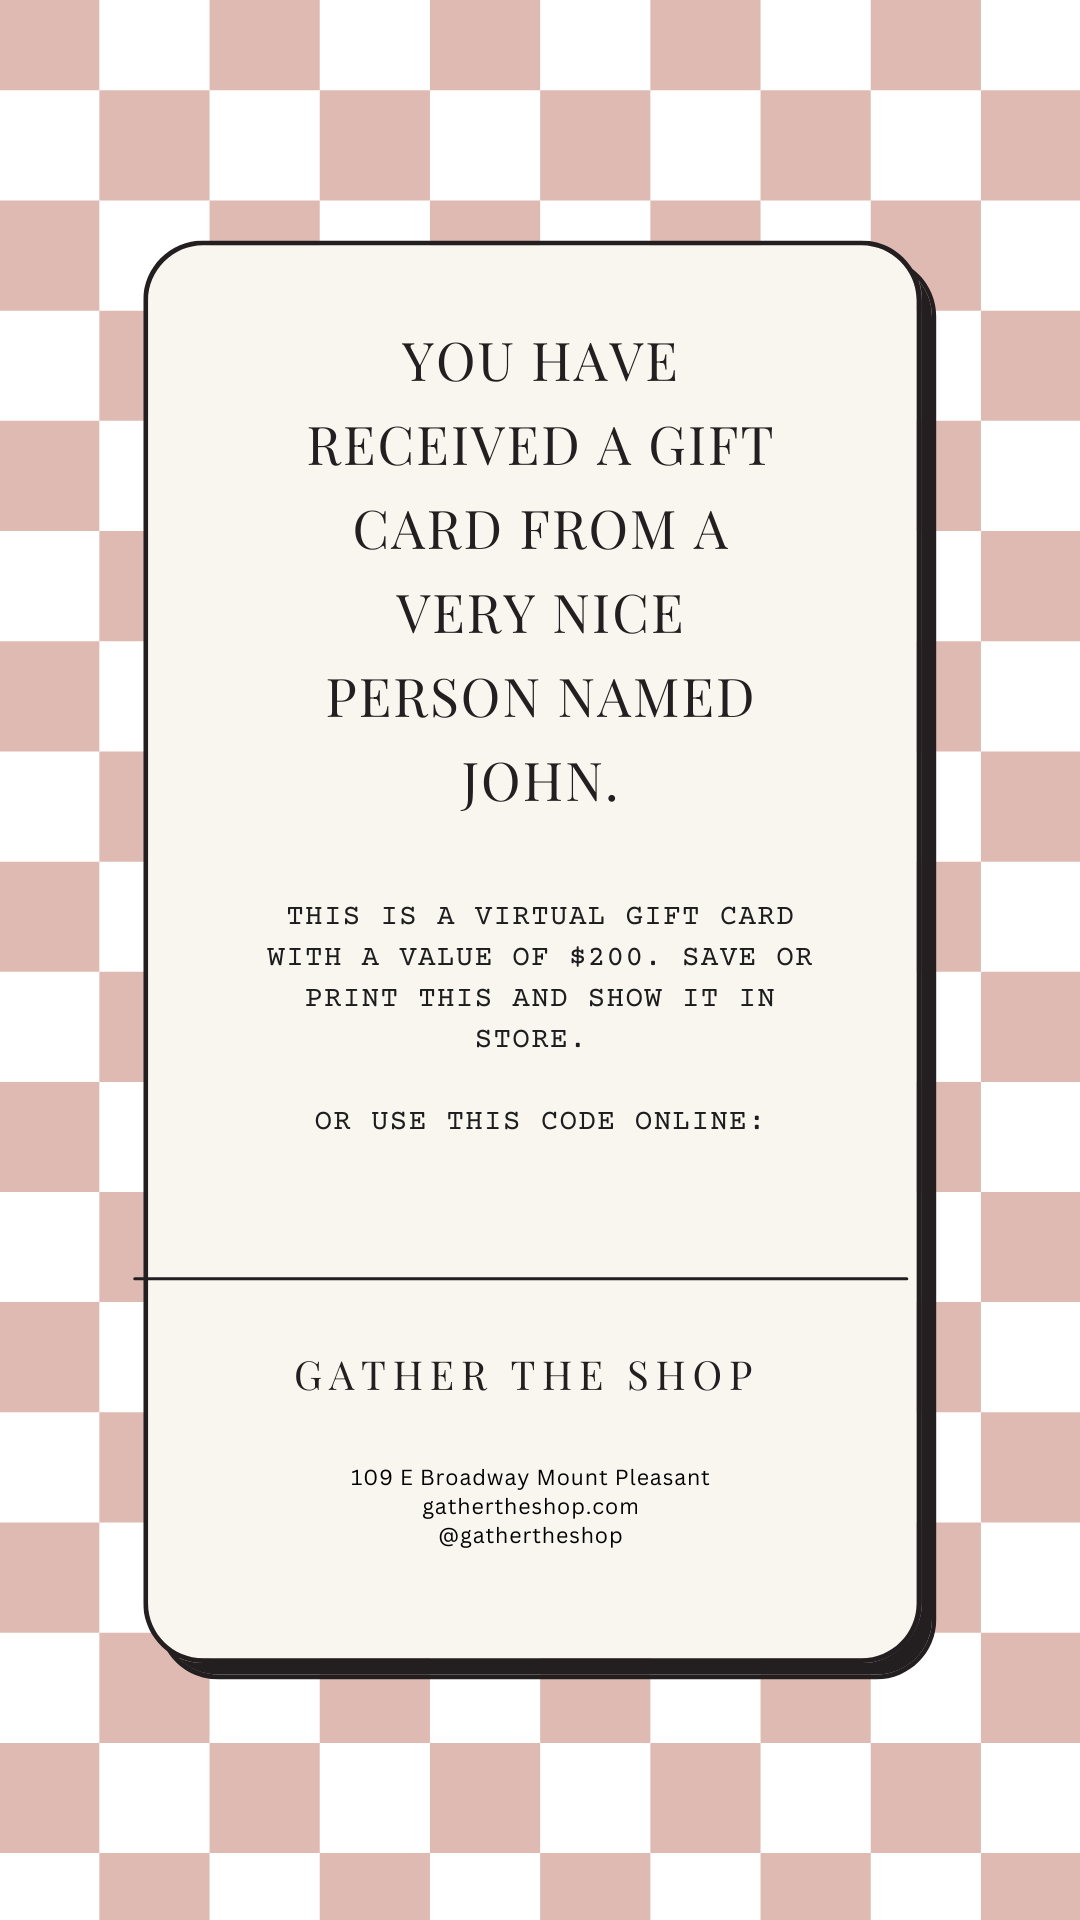 gather gift card